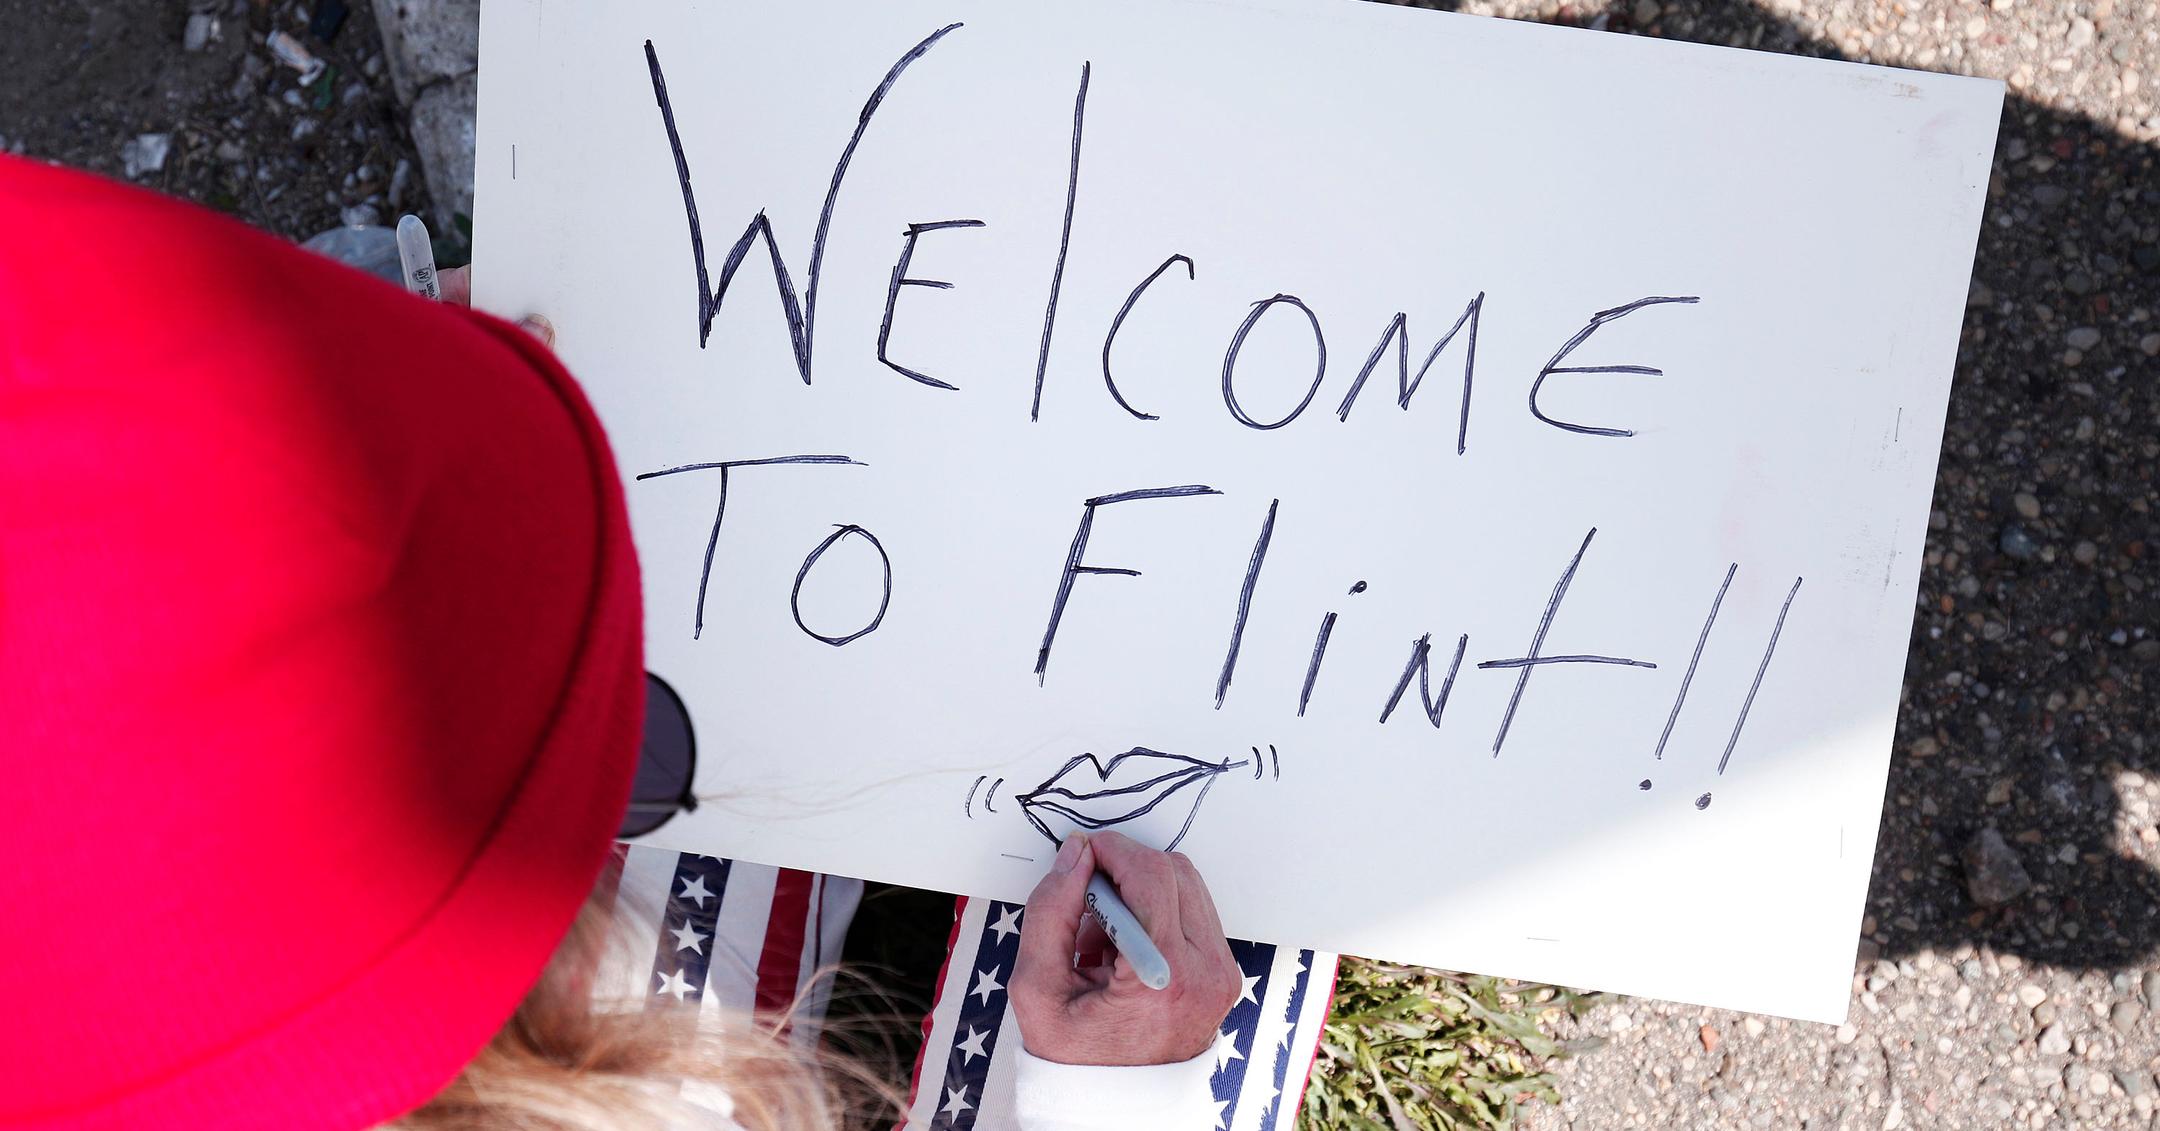 Does Flint, Mich. Have Clean Water? It Does, but There's a Catch